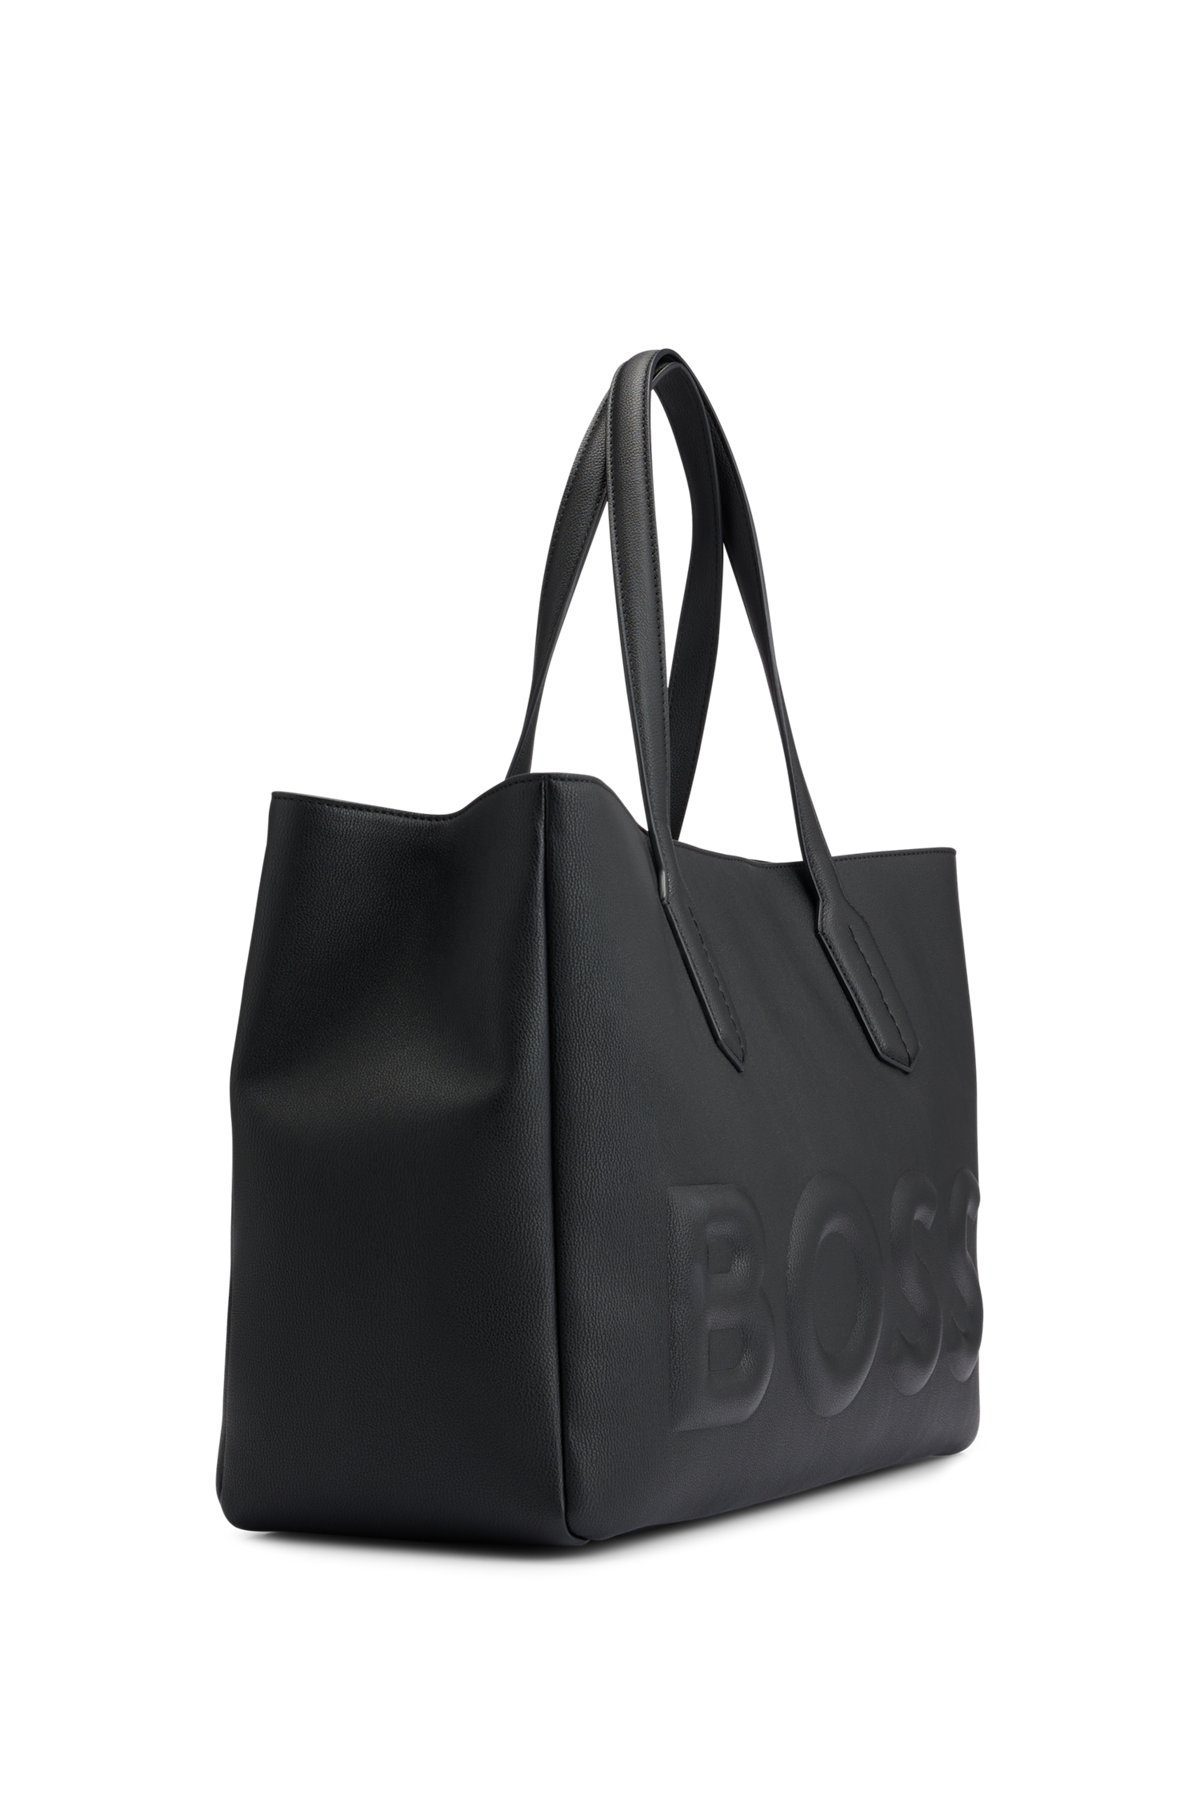 bag leather faux - BOSS logo debossed with Tote in